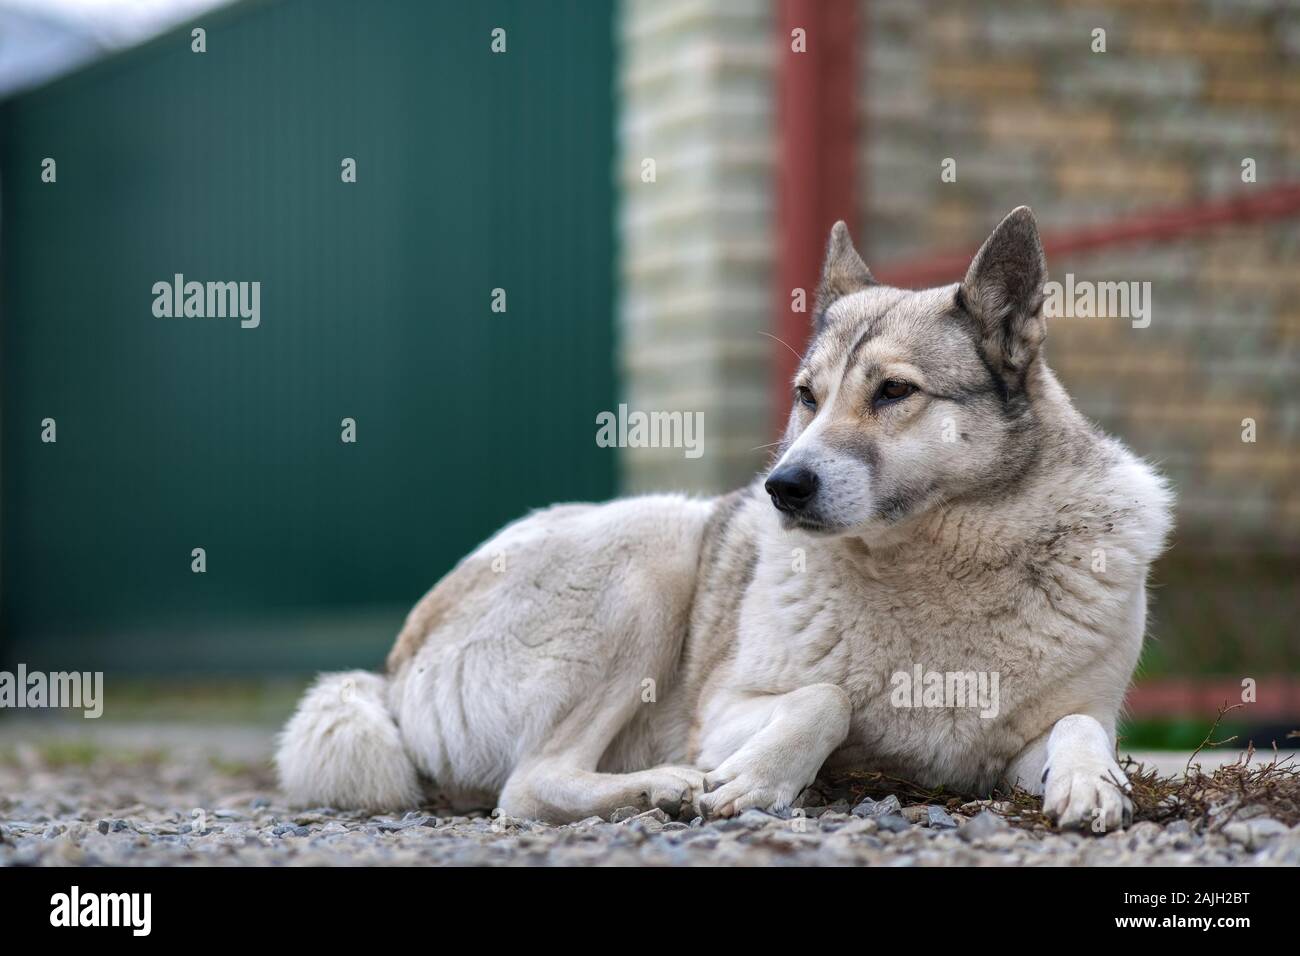 Portrait Of A Dog Breed West Siberian Laika Sitting Outdoors In A Yard Stock Photo Alamy